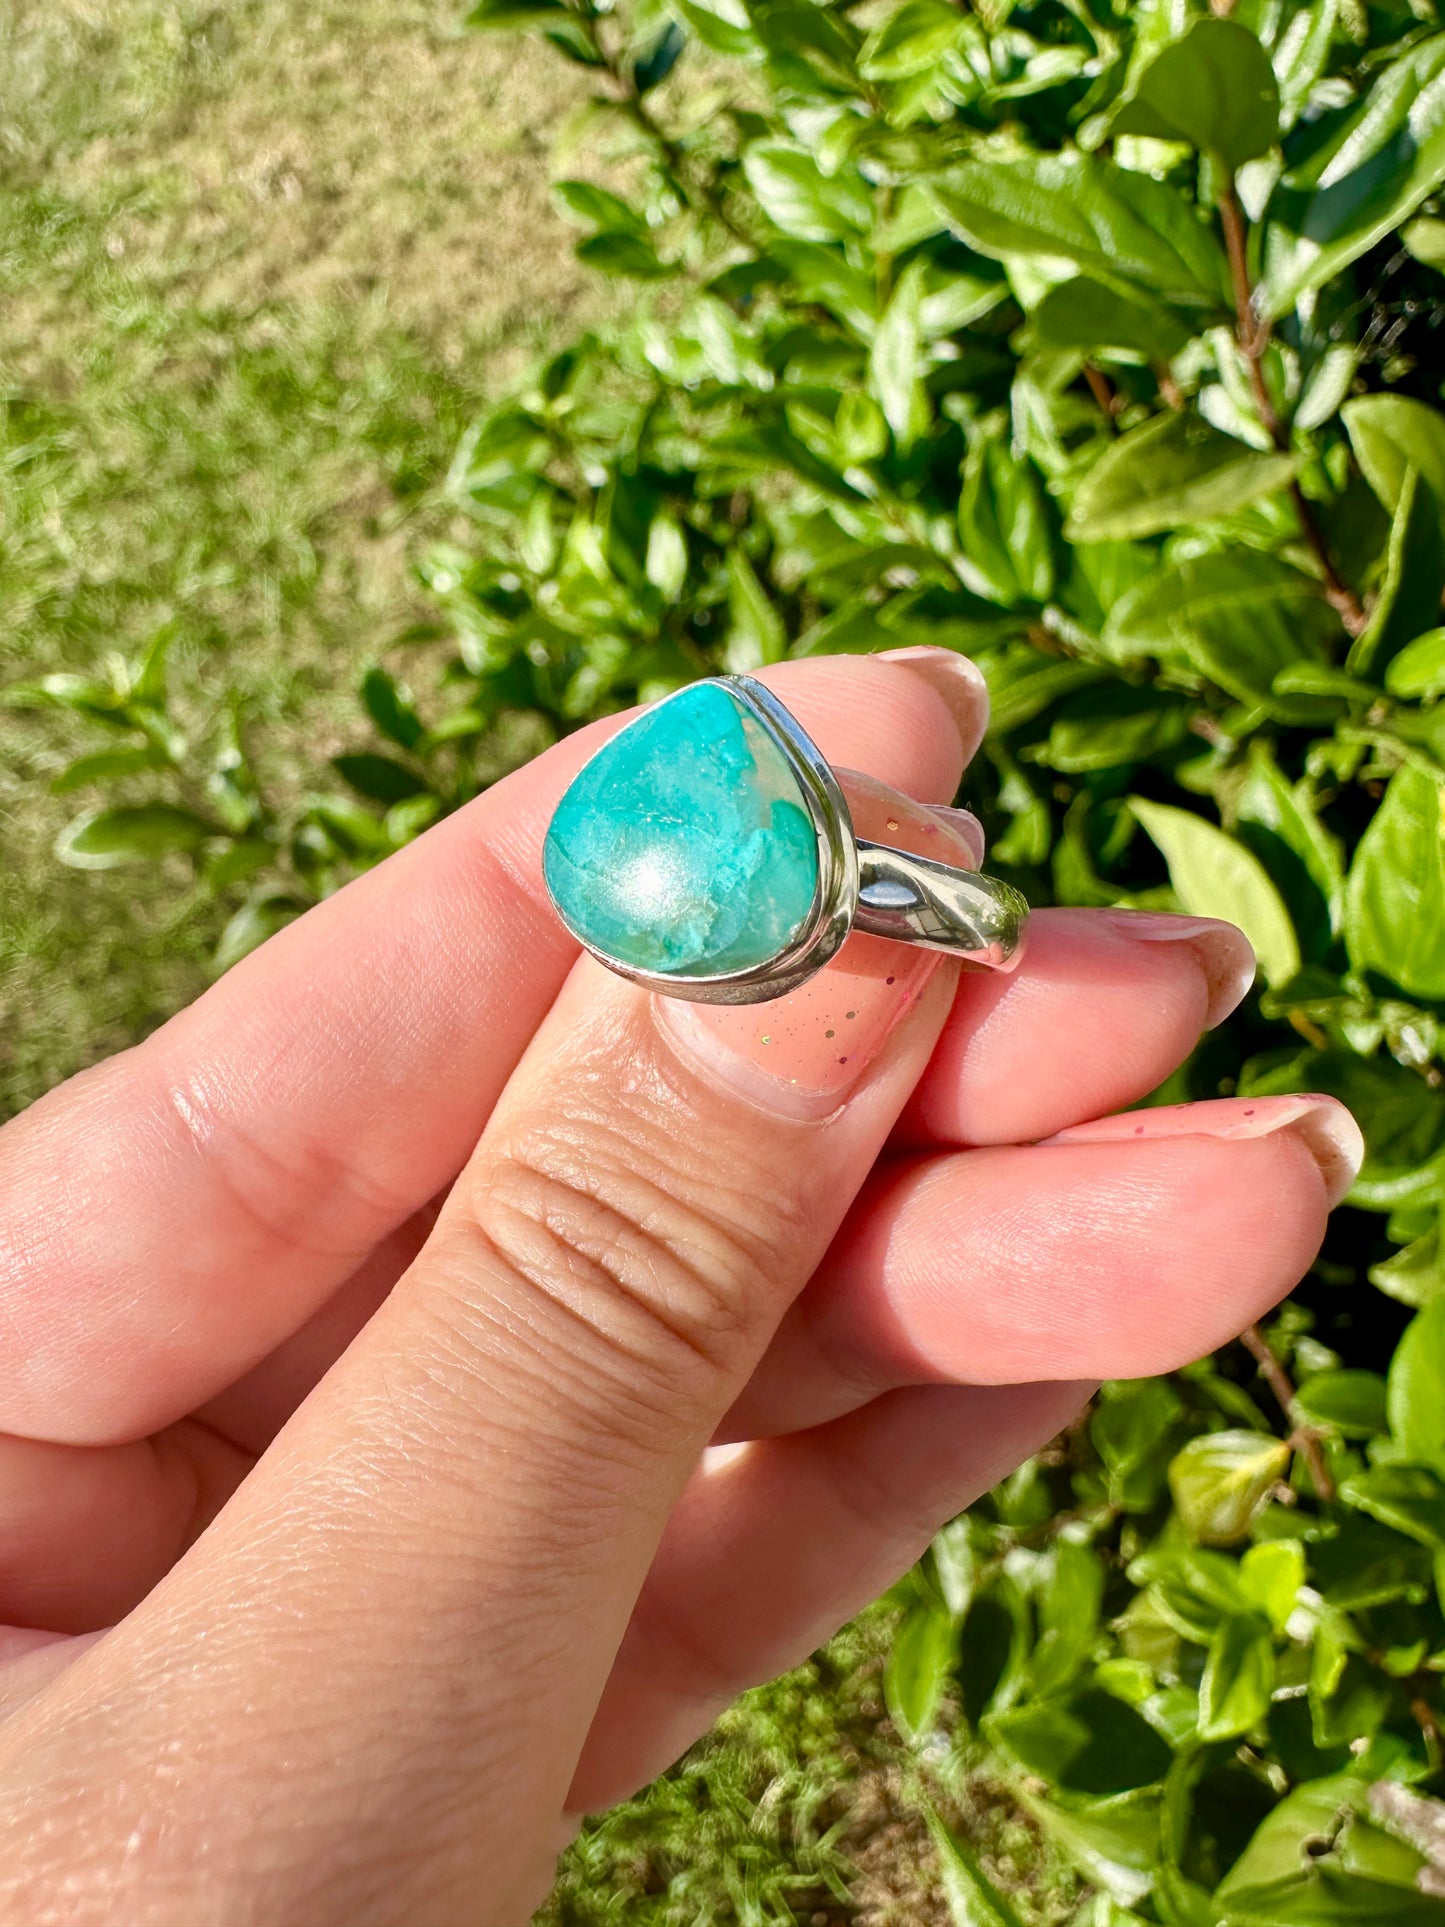 Stunning Amazonite Ring in Sterling Silver, Size 10.25 - Elegant Handcrafted Gemstone Jewelry, Perfect Gift for Special Occasions